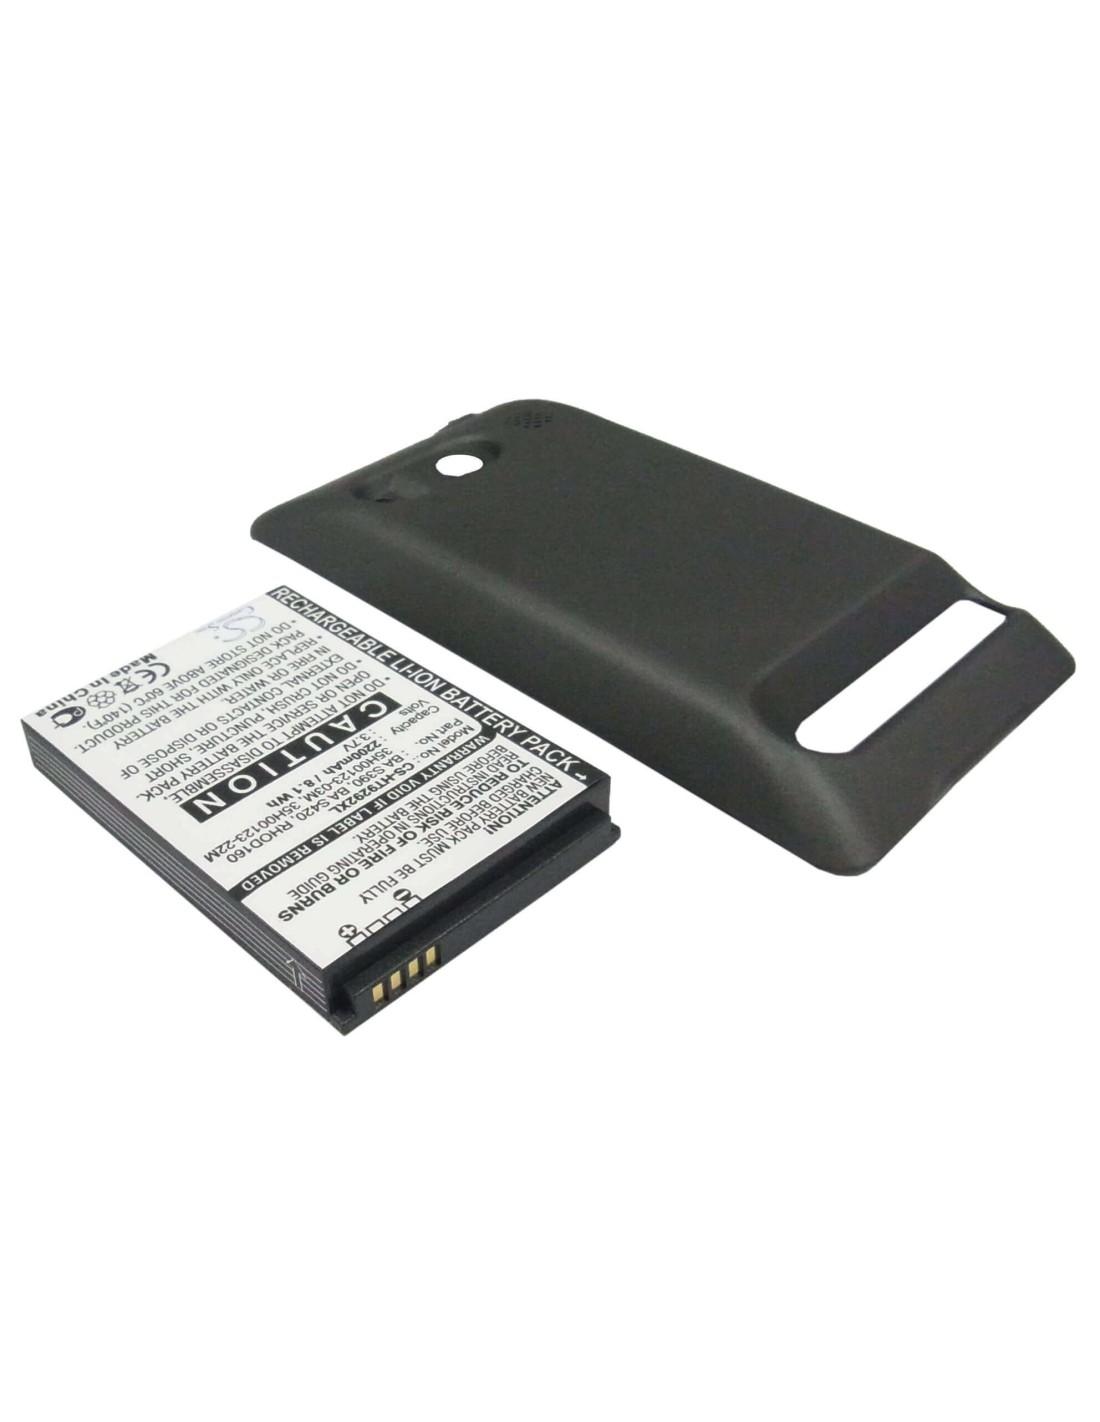 Battery for HTC EVO 4G, A9292, Supersonic, black back cover 3.7V, 2200mAh - 8.14Wh